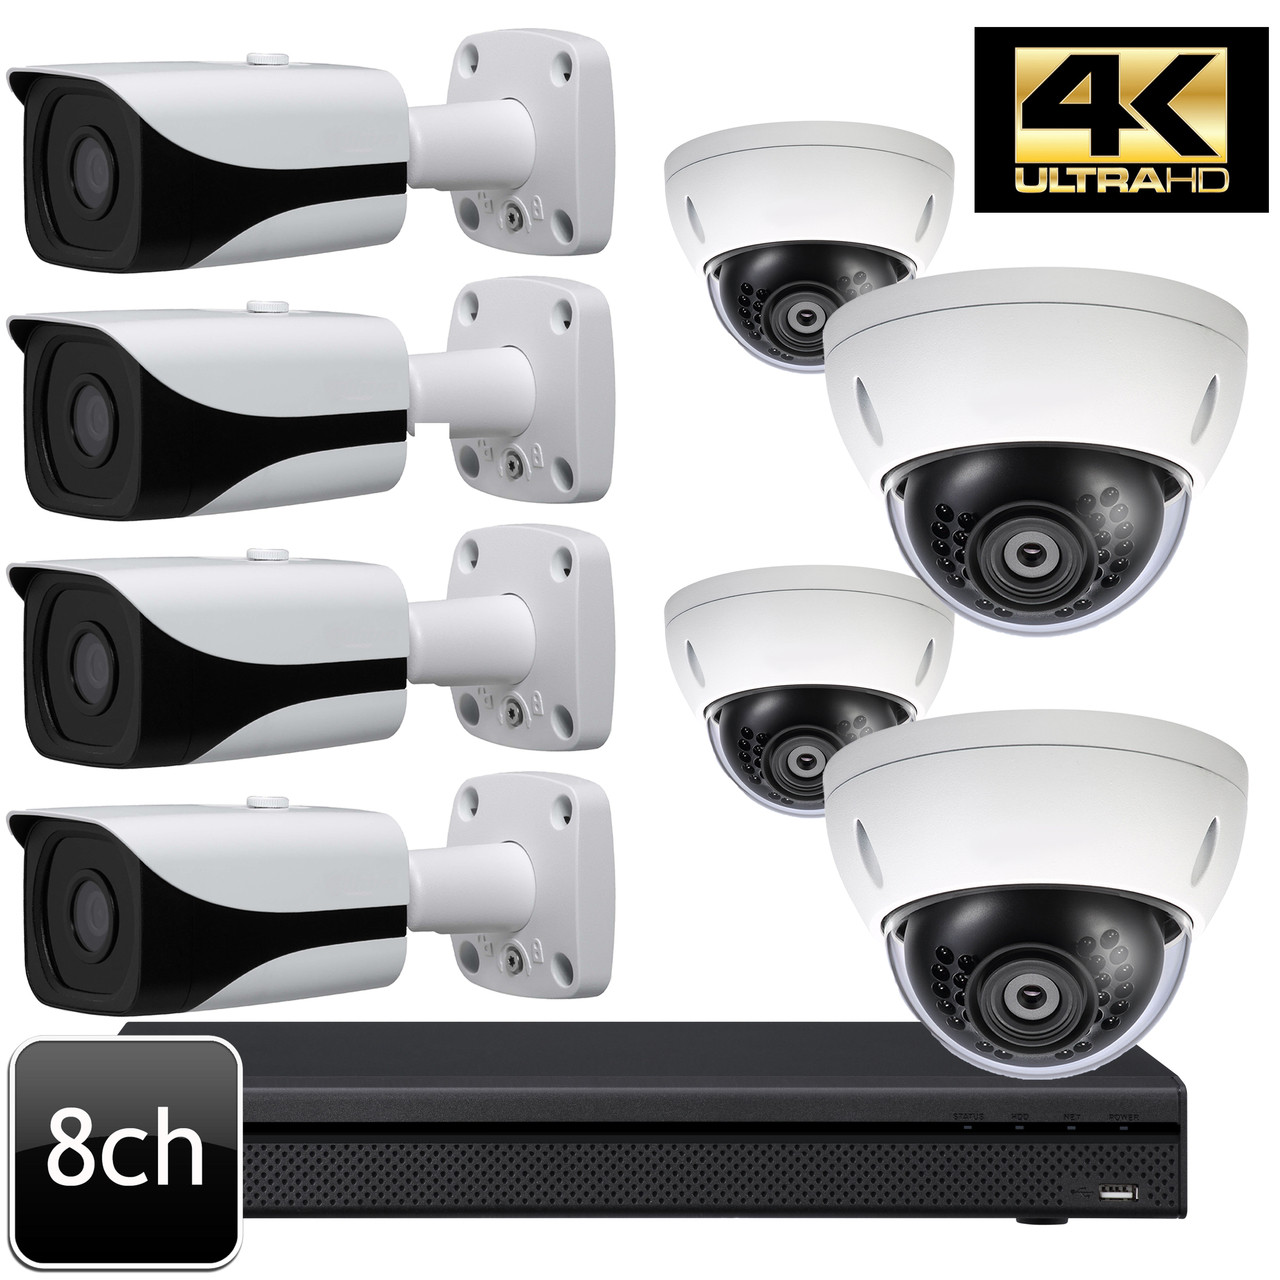 Details about   Dahua OEM 4MP 8CH DVR Security Surveillance Dome Camera Wired System 1TB HDD 